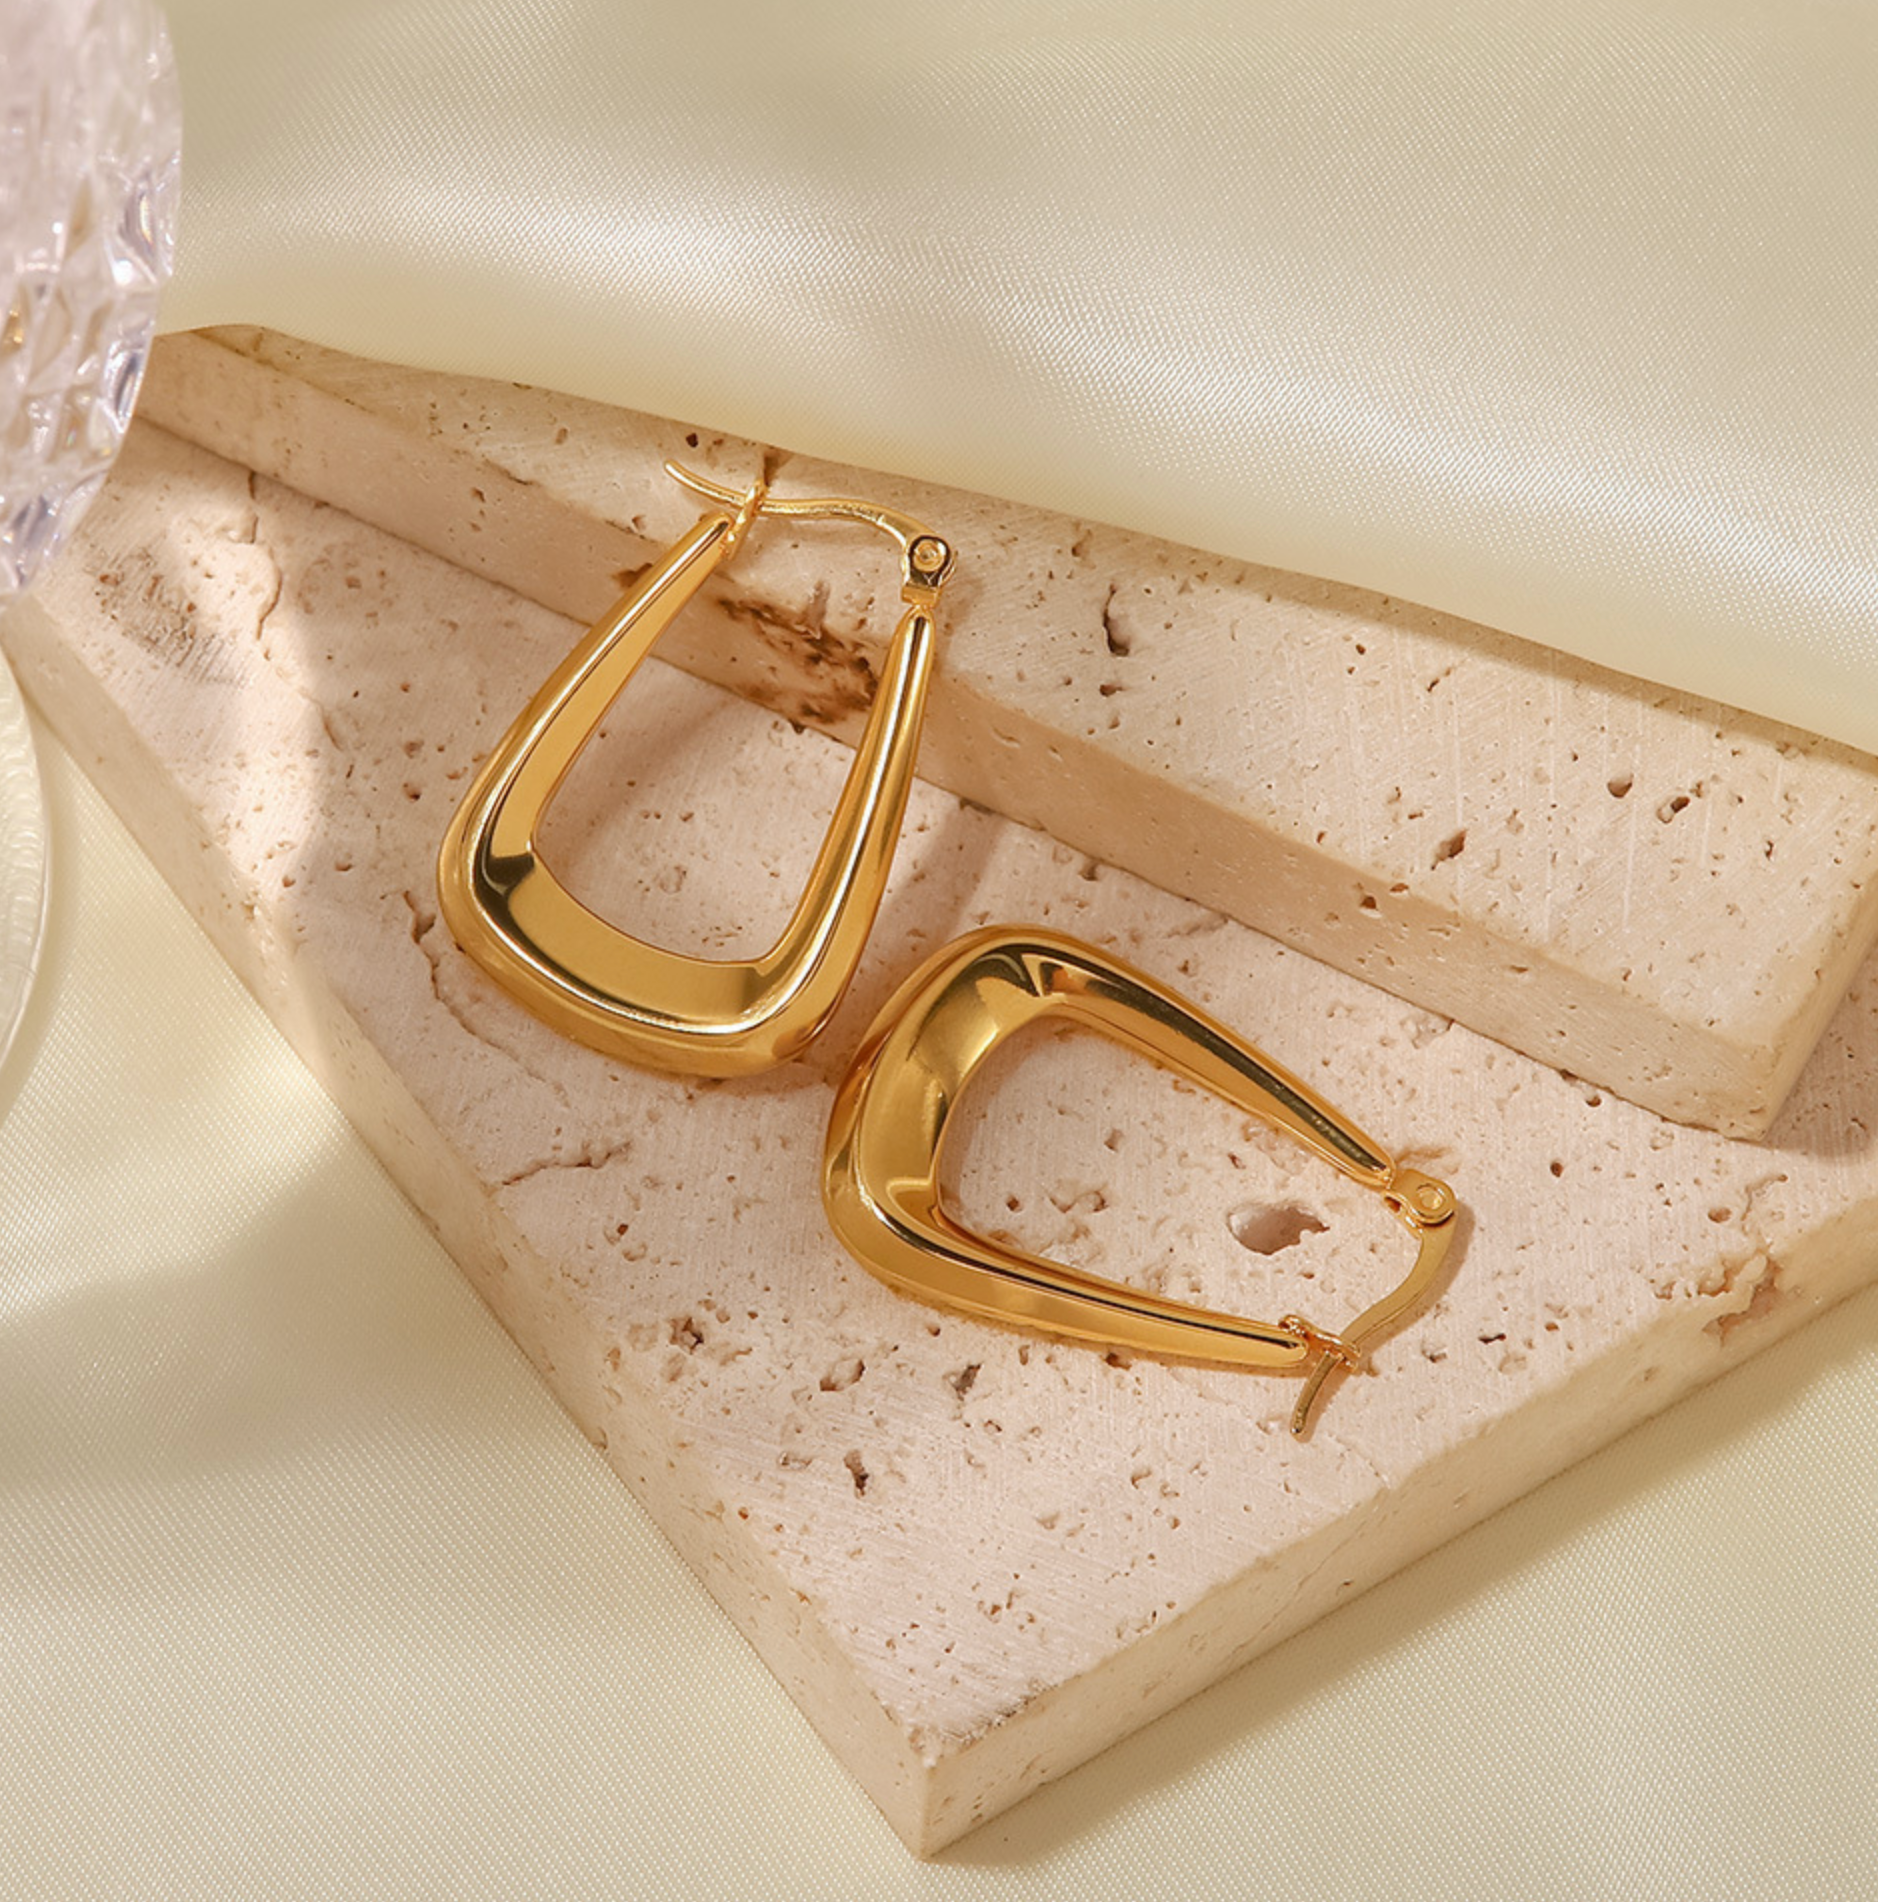 A pair of WS-Trapezoid hoop earrings with a stone accent, by 3Souls Company.